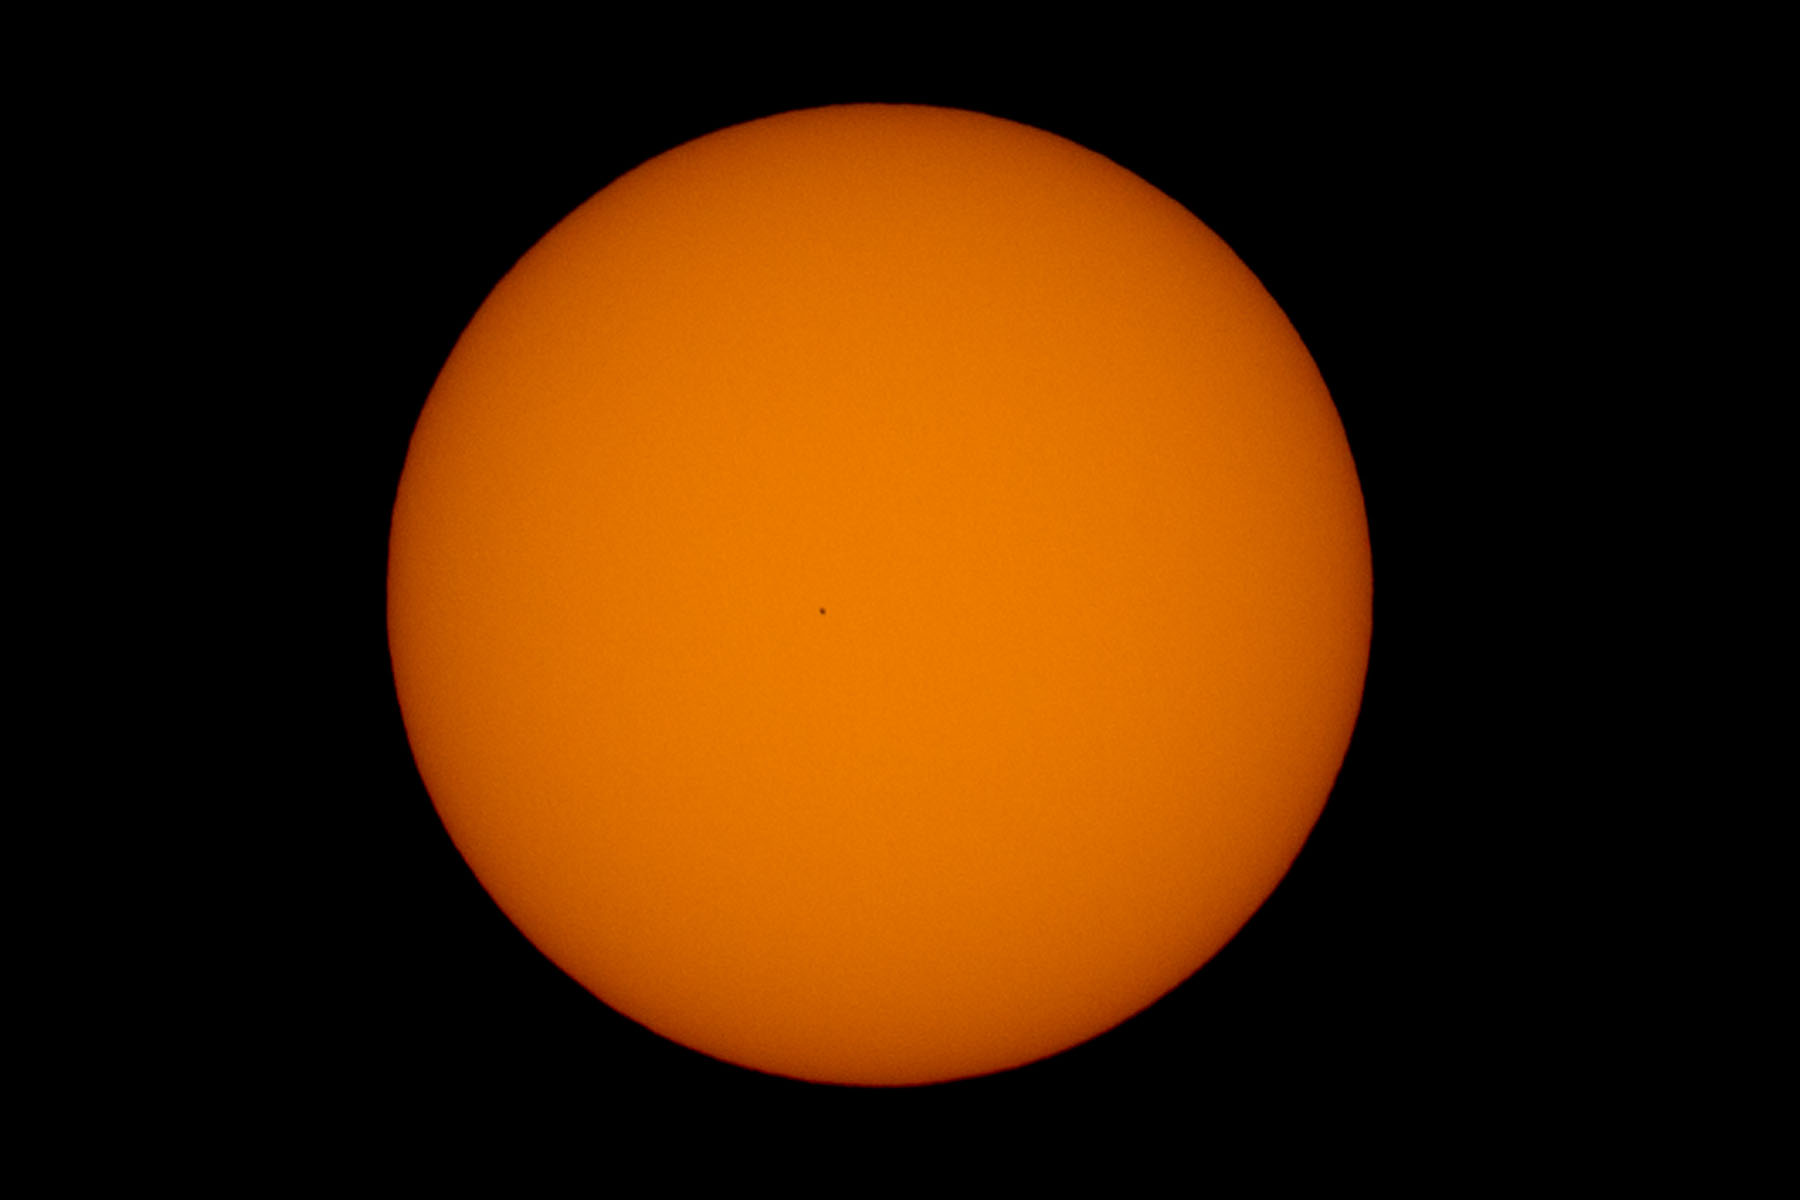 Transit of Mercury, Nov. 11, 2019.  Mercury is the tiny dot near the center of the Sun.  No sunspots, unusual.  Click for next photo.